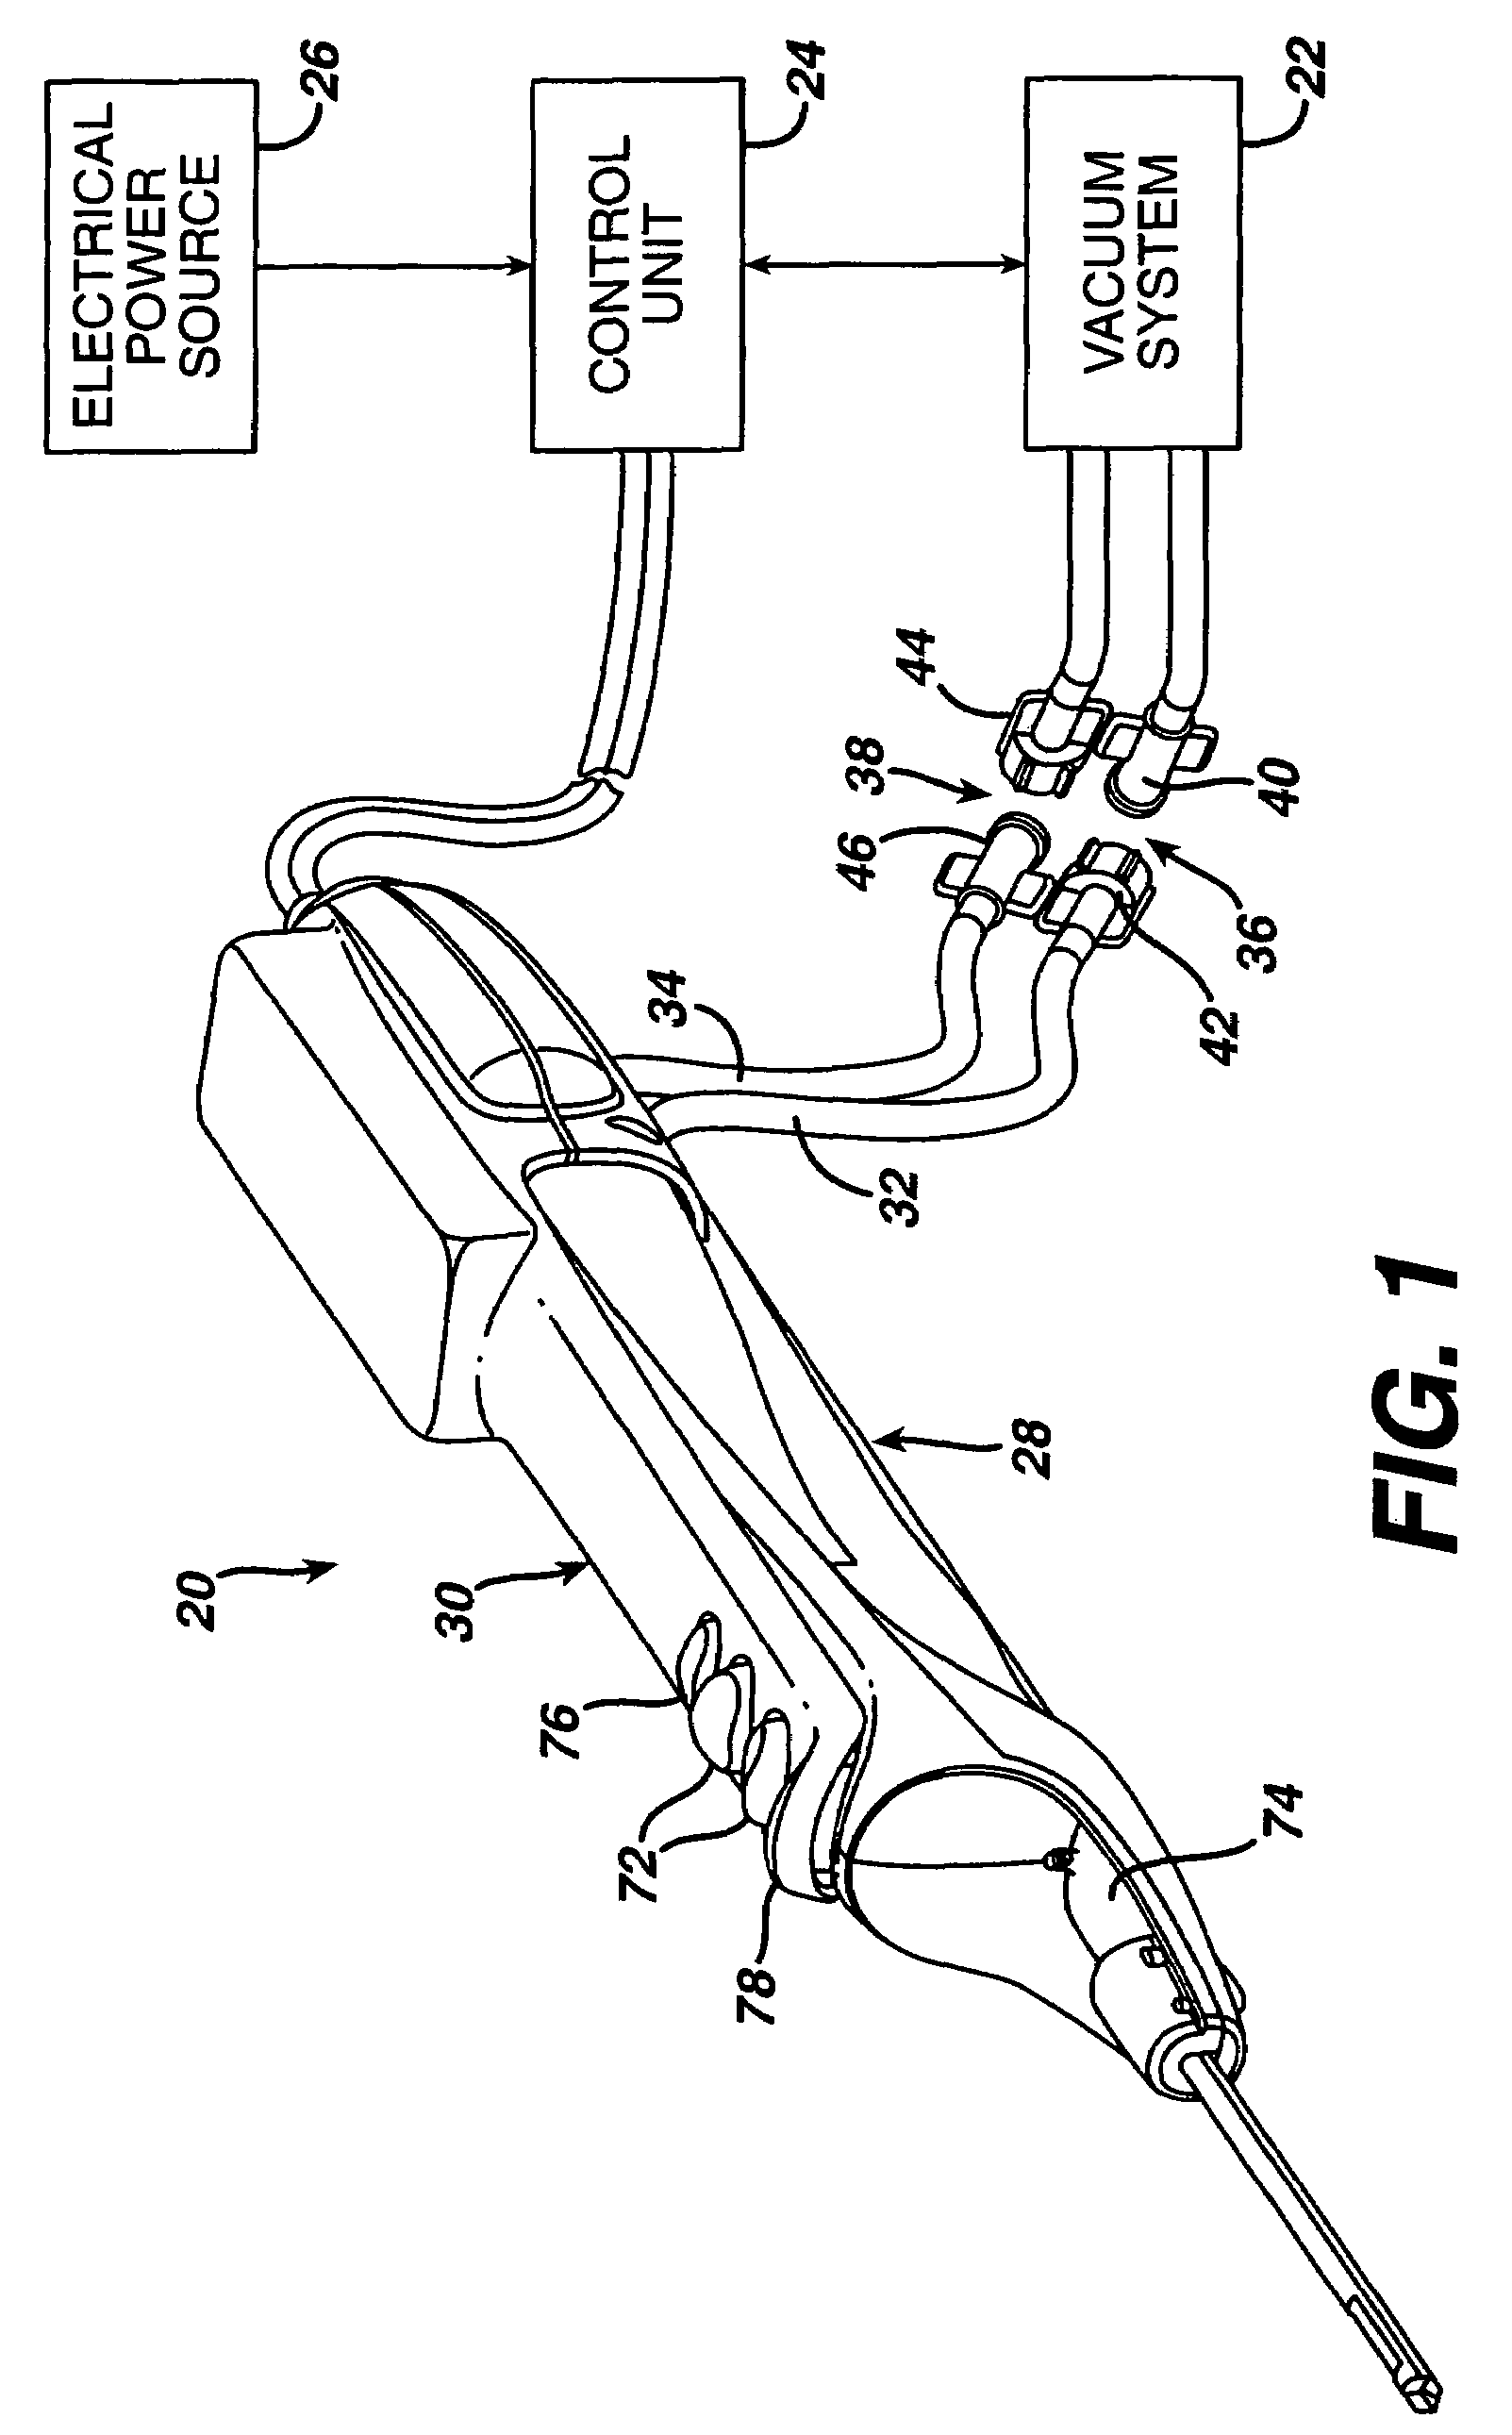 Method of operating a biopsy device